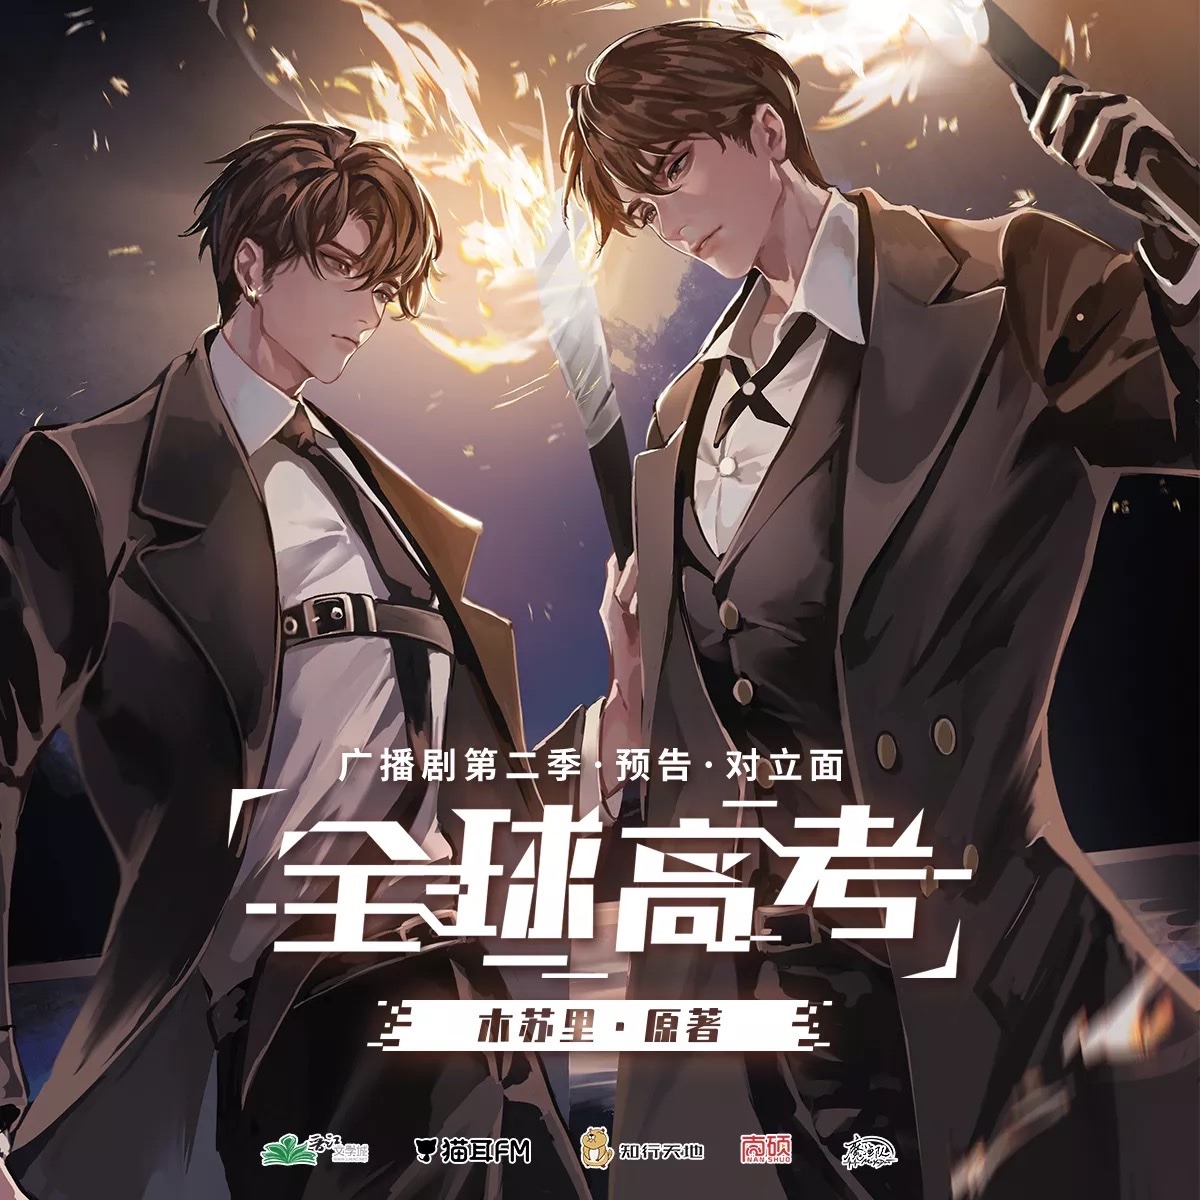 Global Examination, written by Mu Su Li, is an action-mystery manhua about an examination where your life is put at stake. One day, one of the examinees, You Huo, magically spawns into this inhumane system without any of his memories, yet somehow he knows how to pass every exam and escape death.